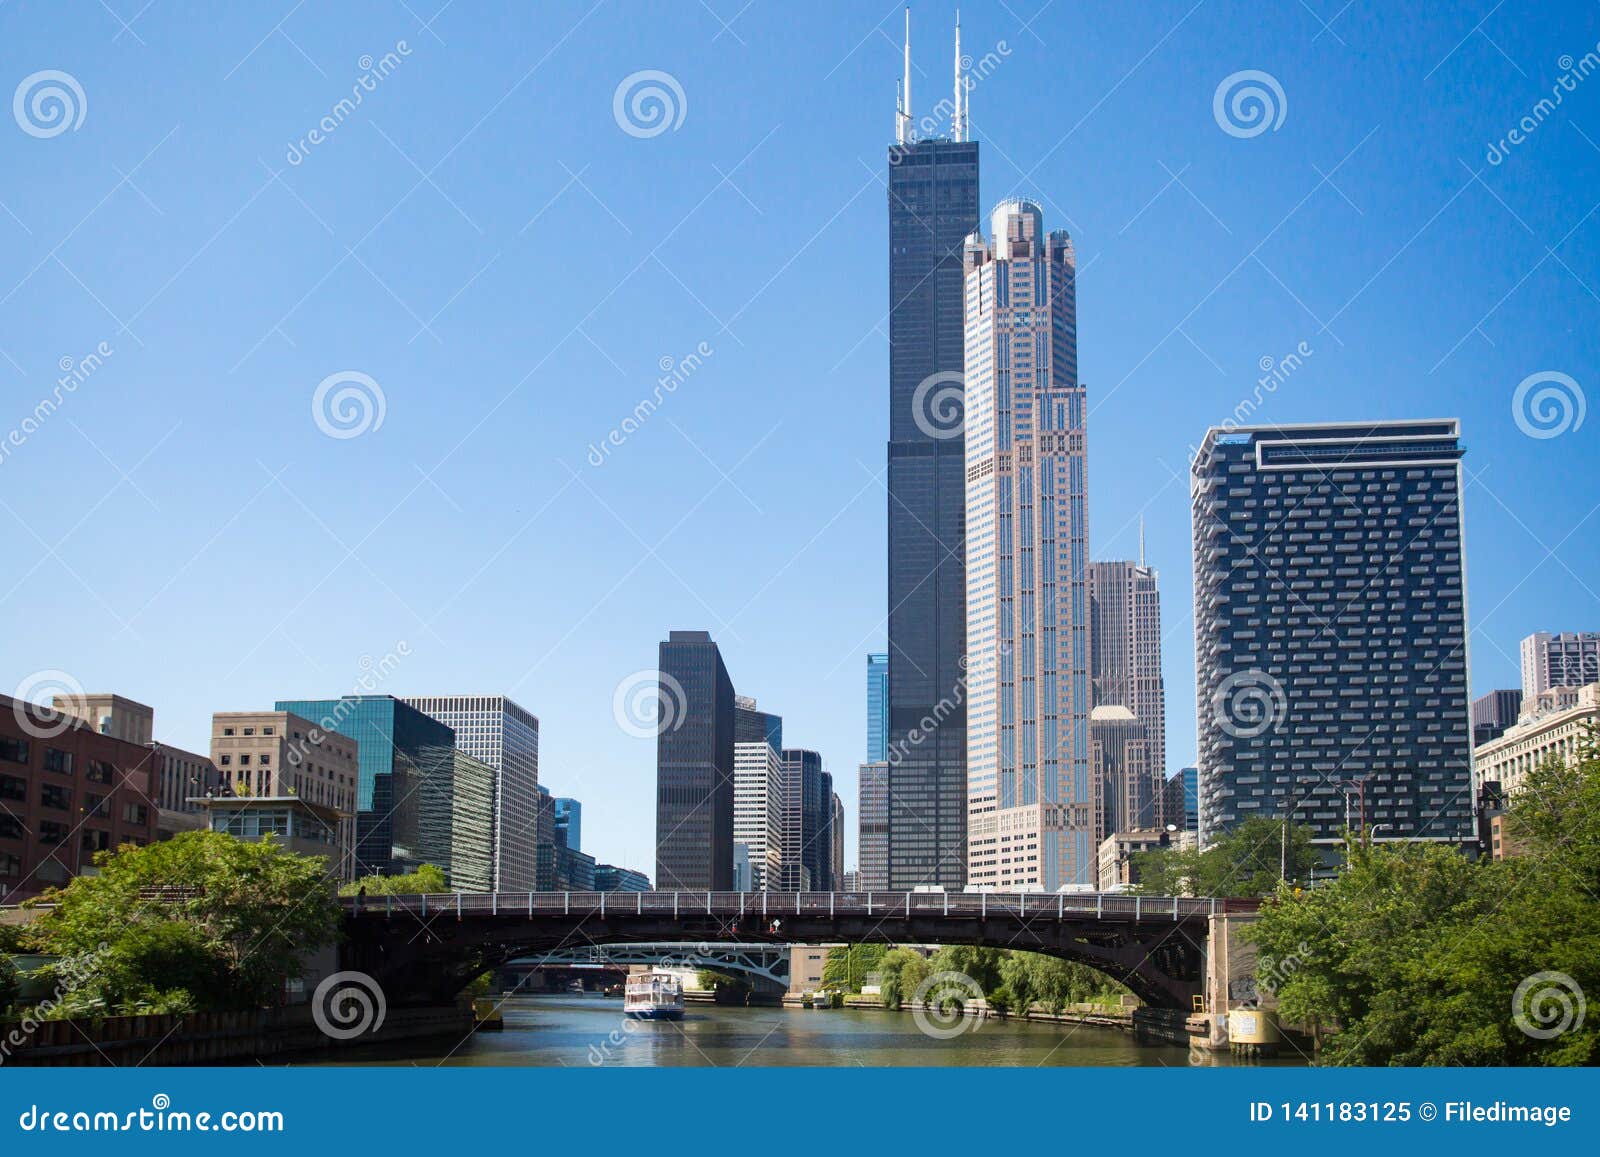 willis tower in chicago on the chicago river